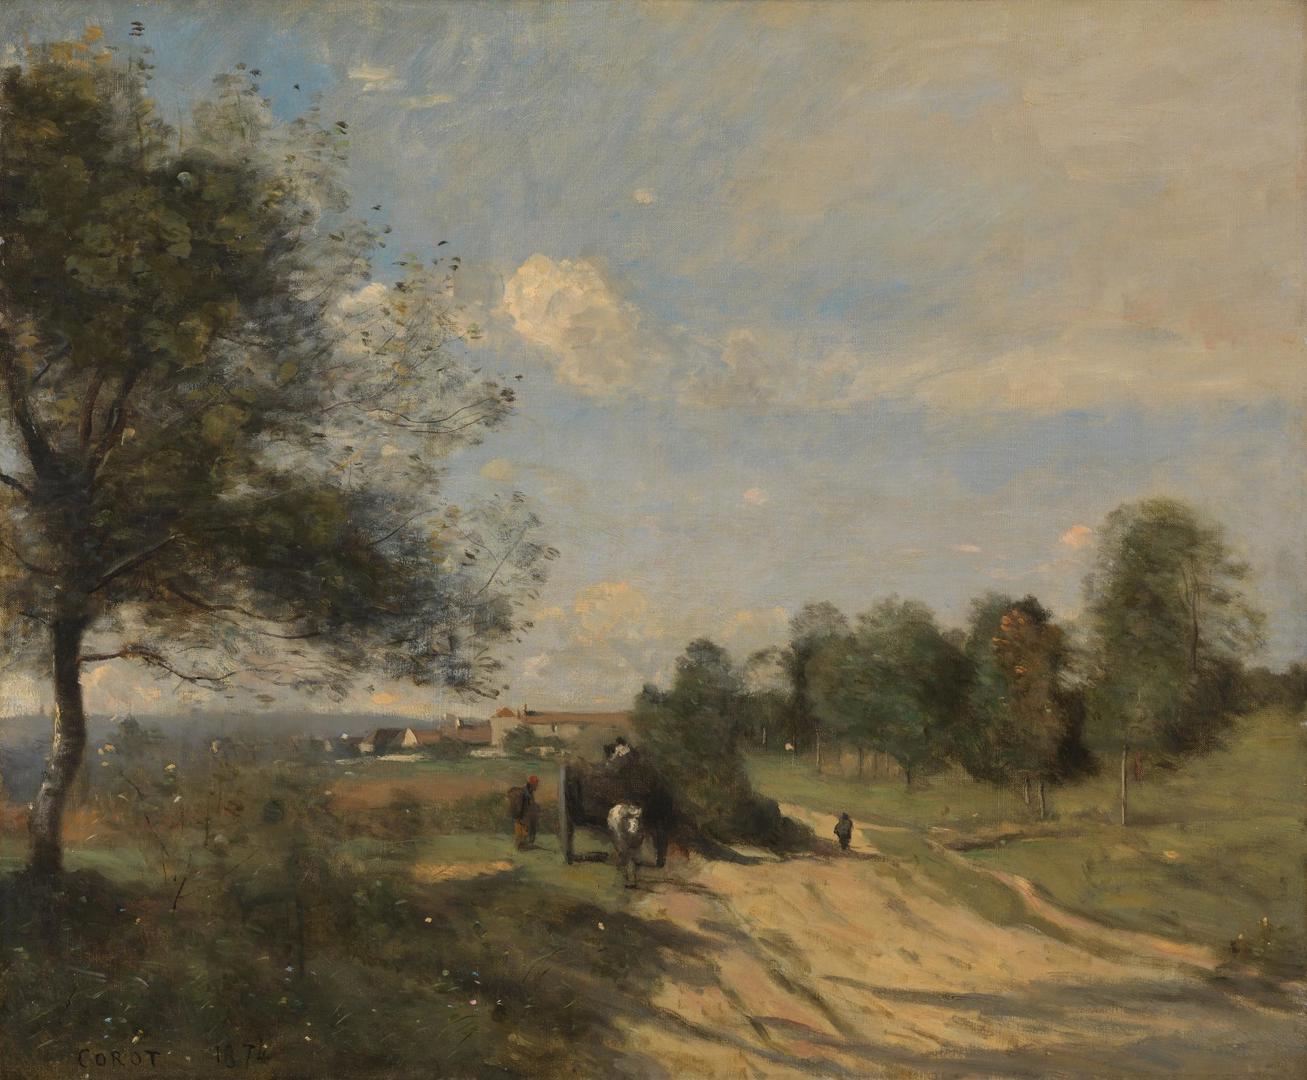 The Wagon ('Souvenir of Saintry') by Jean-Baptiste-Camille Corot